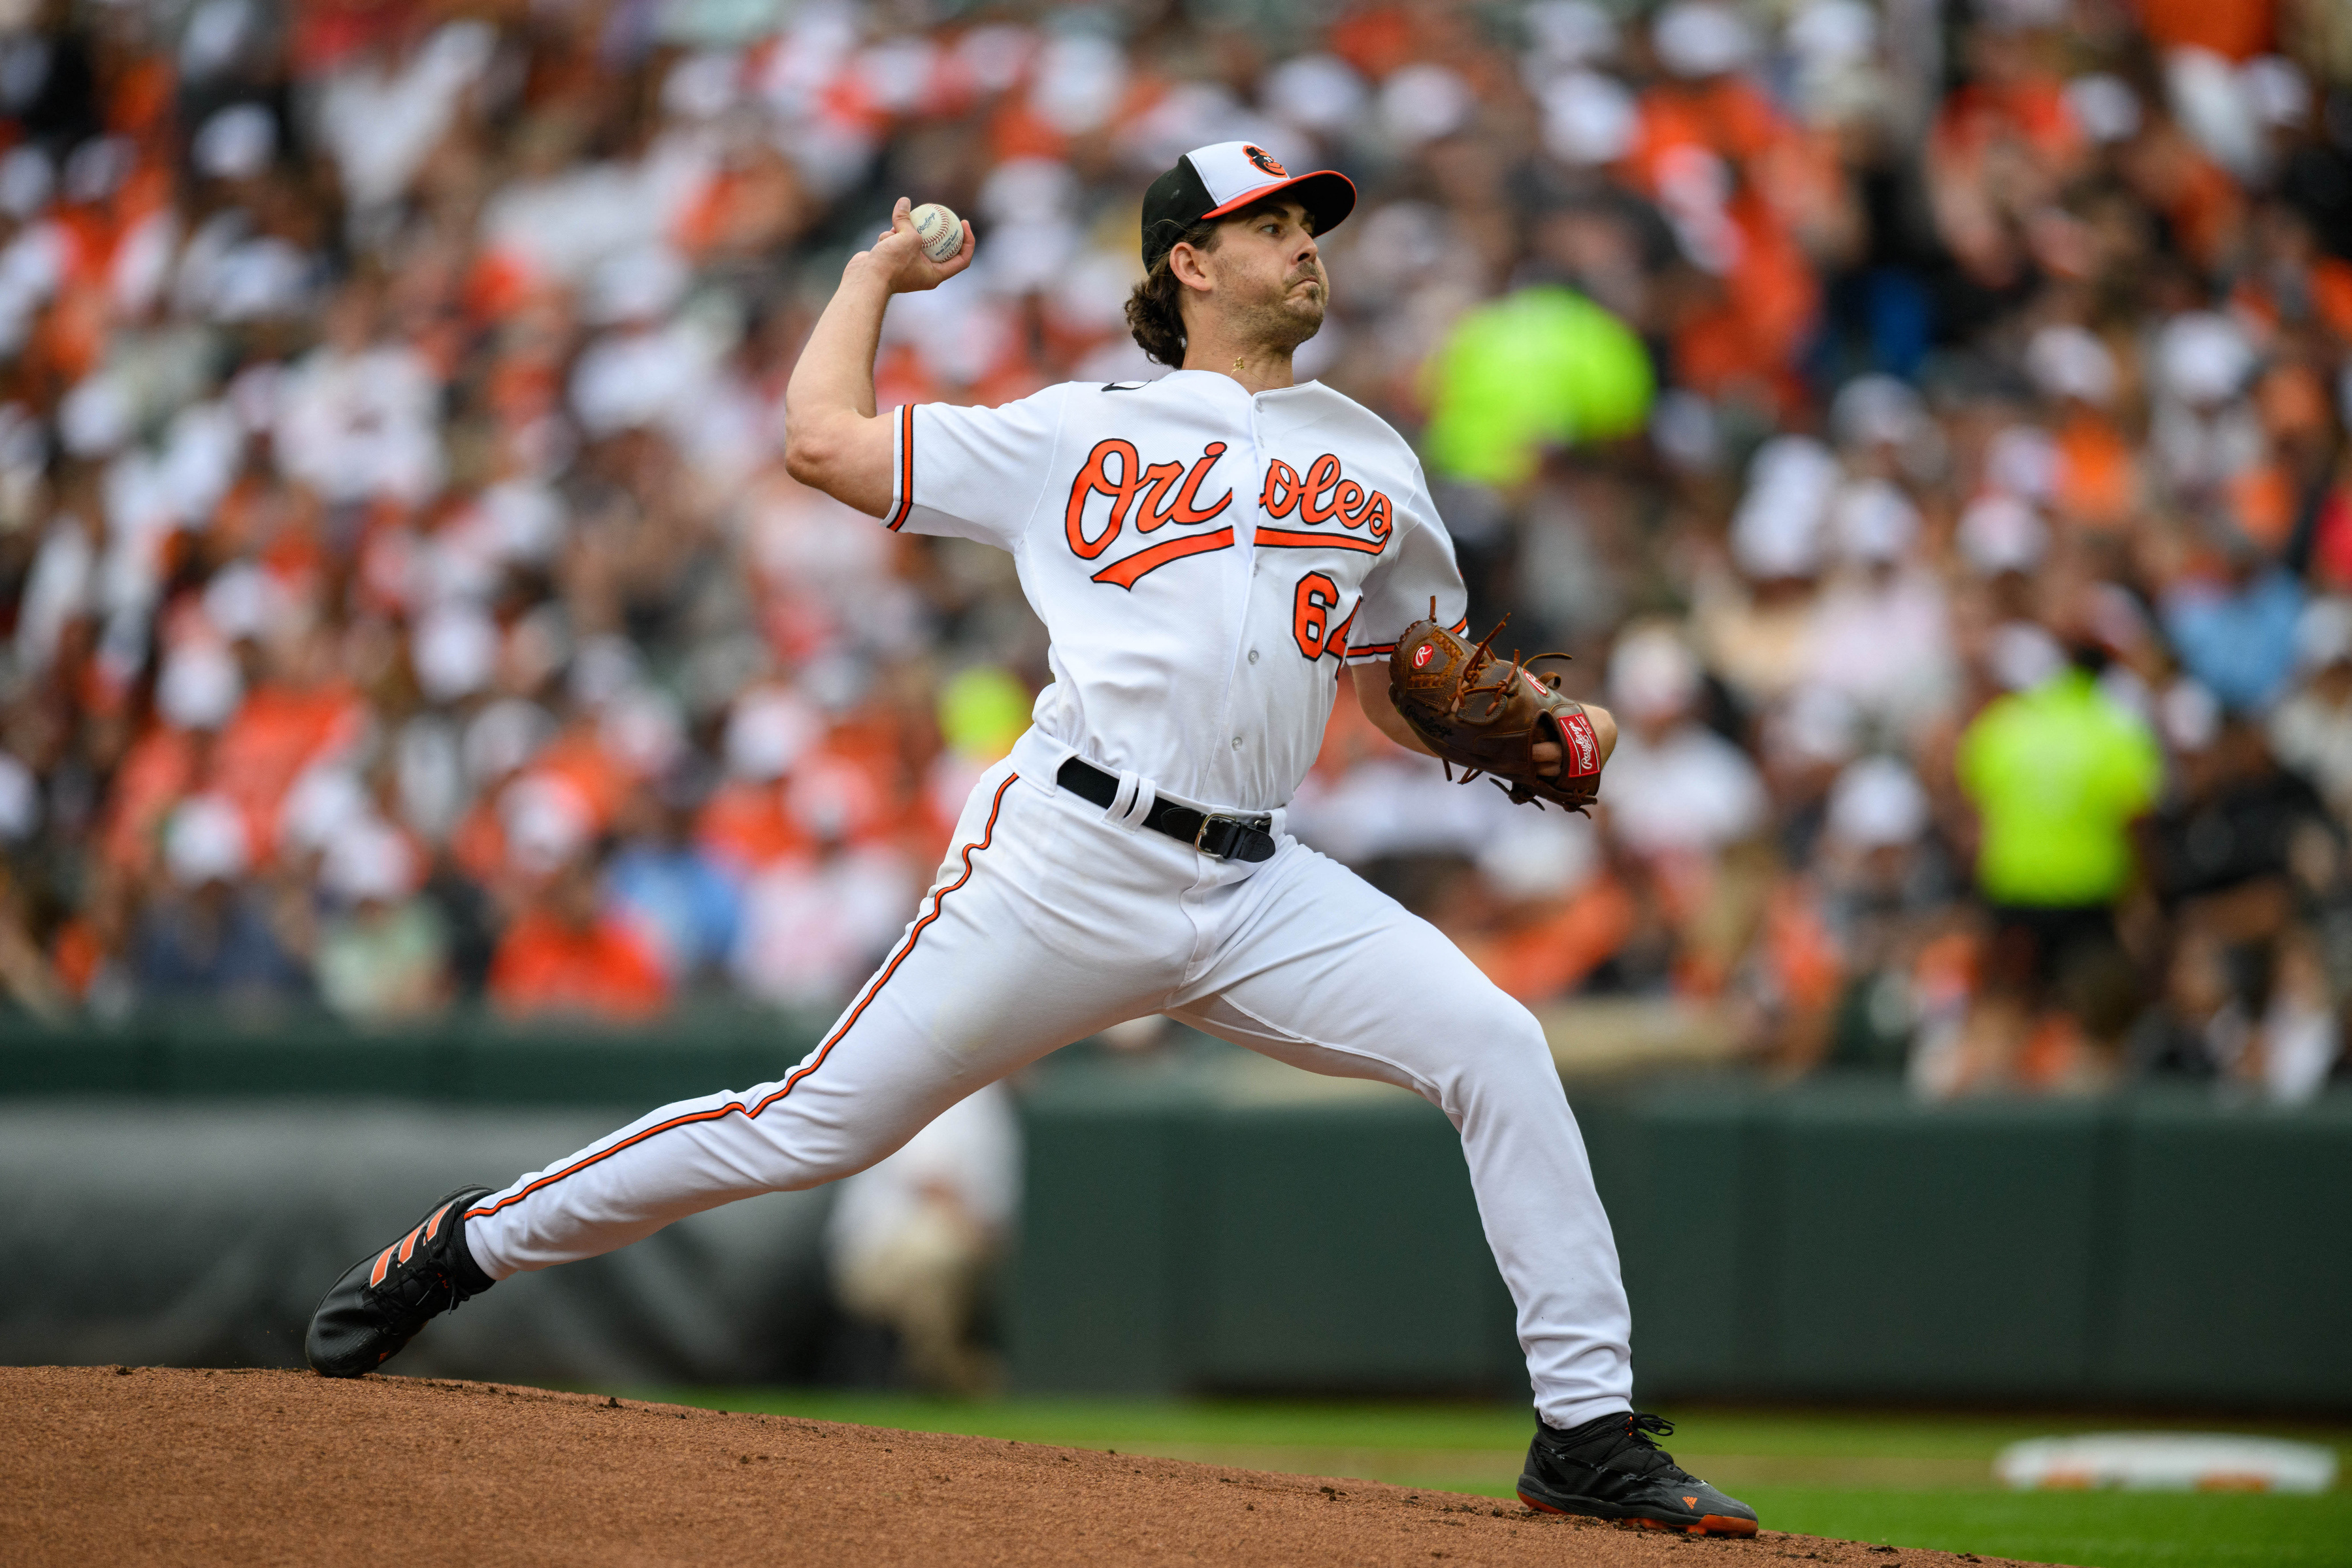 More on Orioles' dramatic win over Rays - Blog